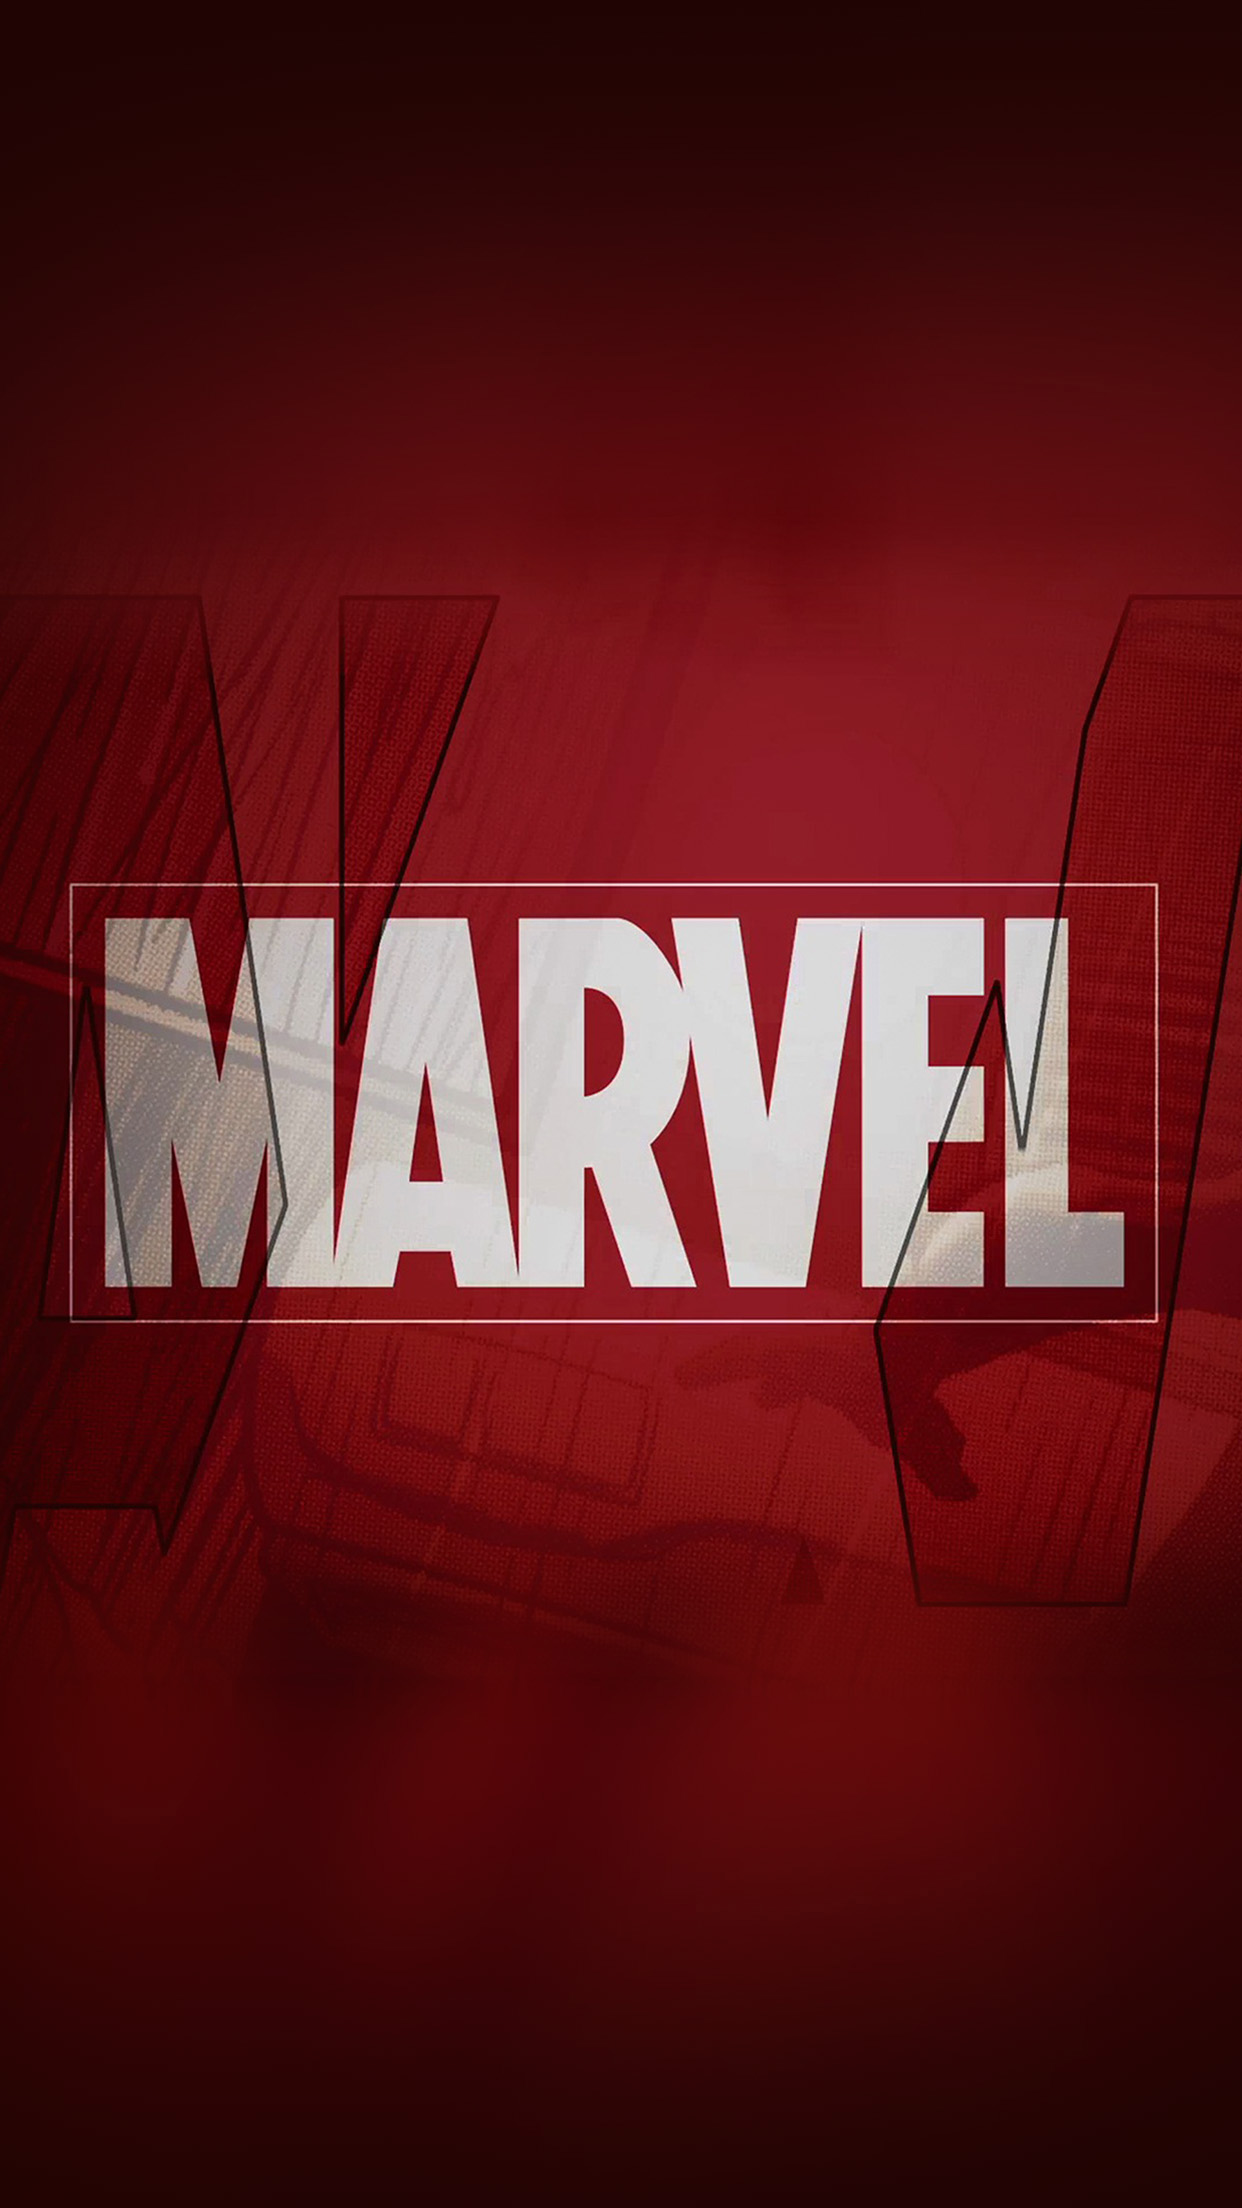 Marvel Logo Movie Series Comics Android Wallpaper free download